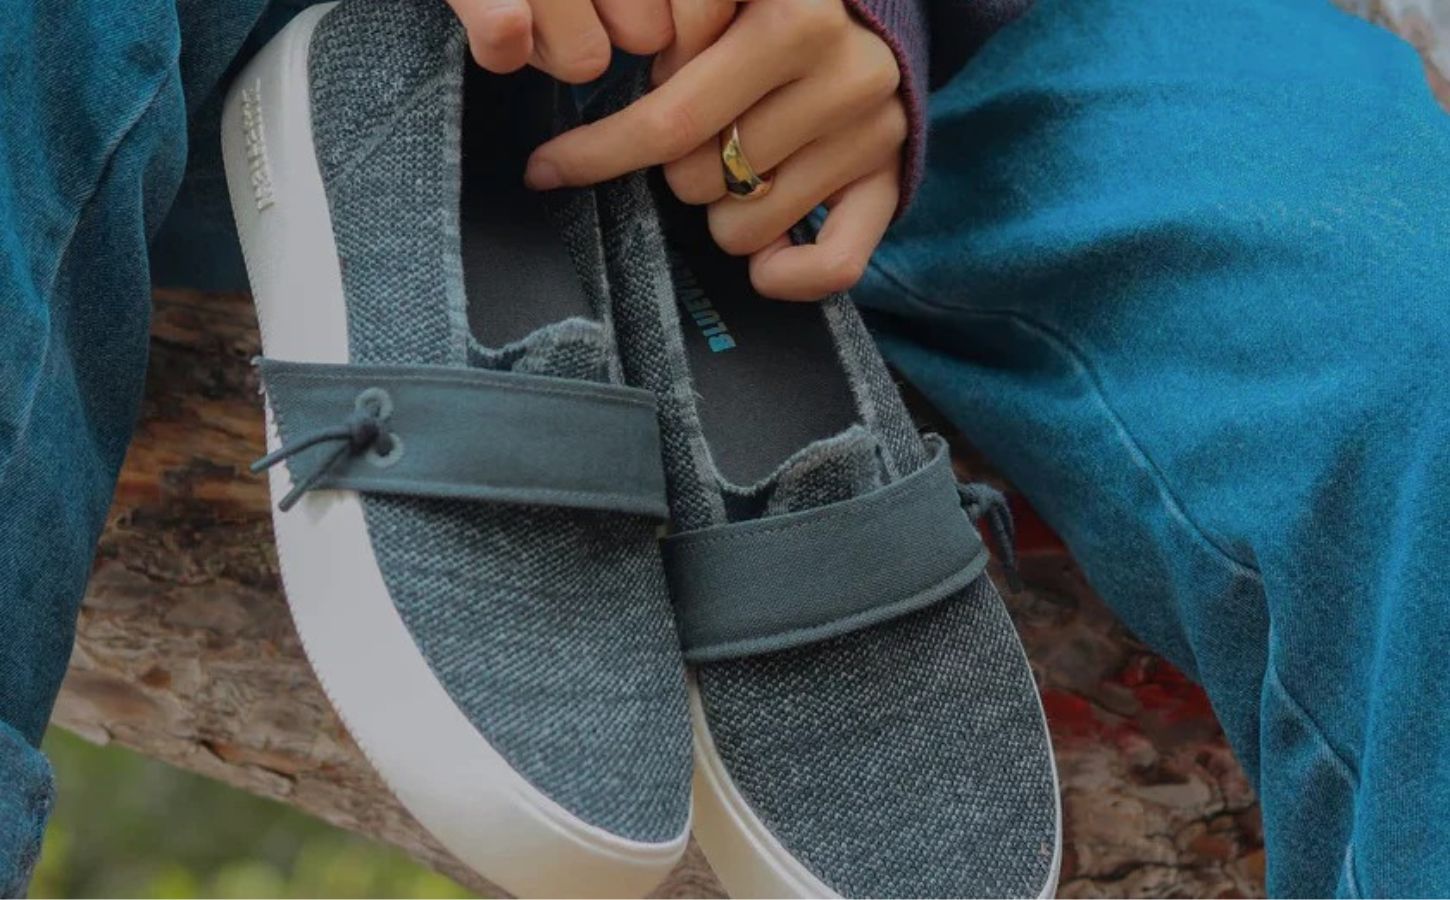 Comfortable and biodegradable vegan shoes from Blueview